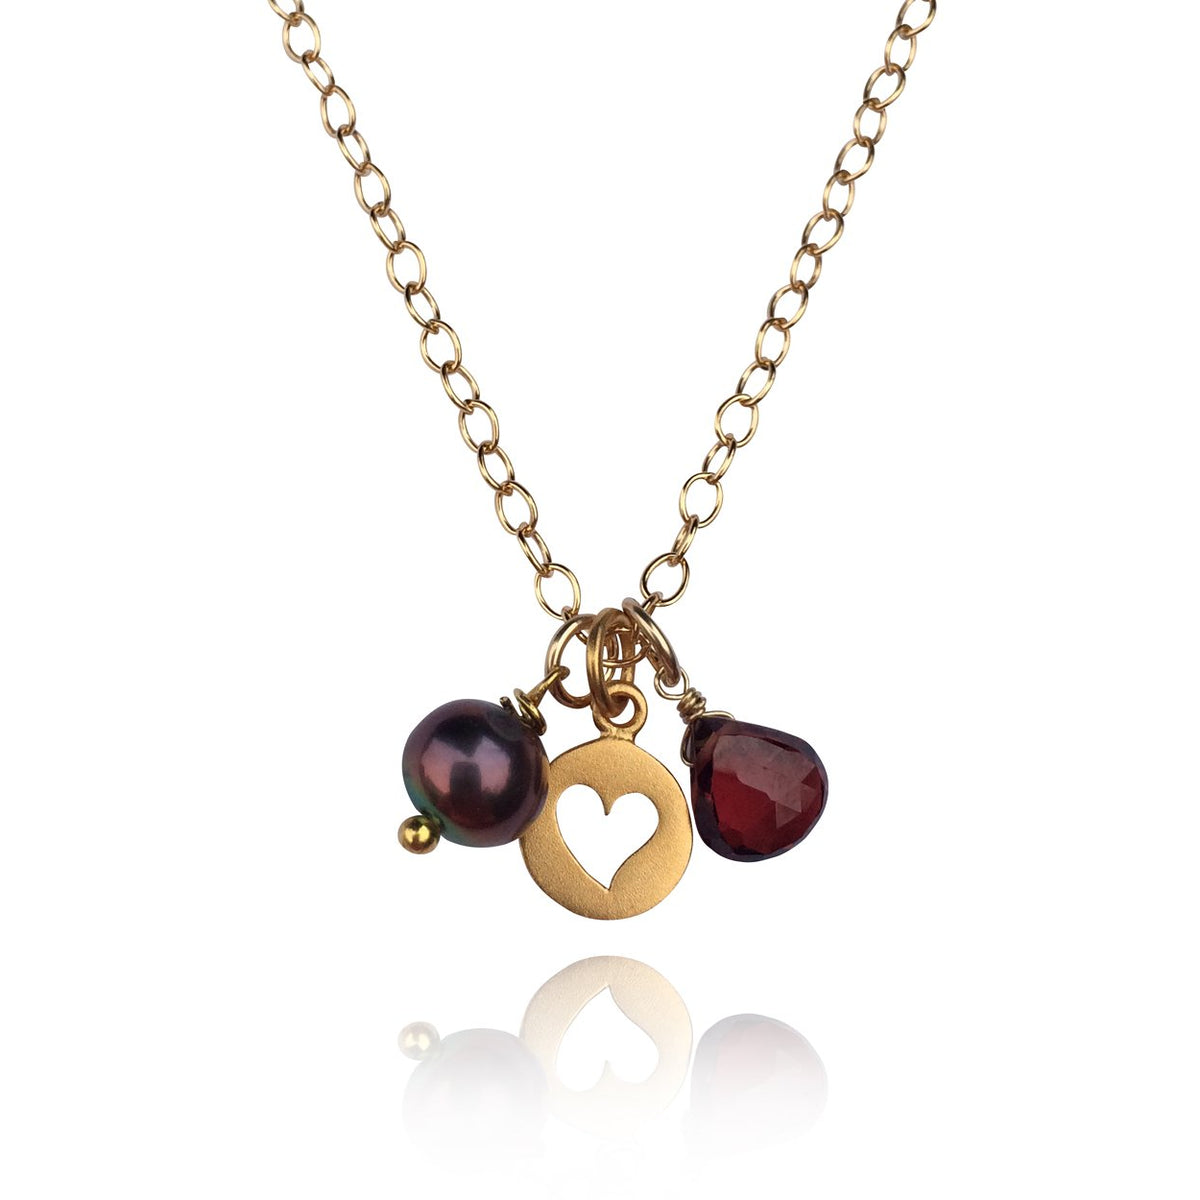 Attract Love - Gold Filled Heart Necklace with Garnet and Fresh Water Pearl.